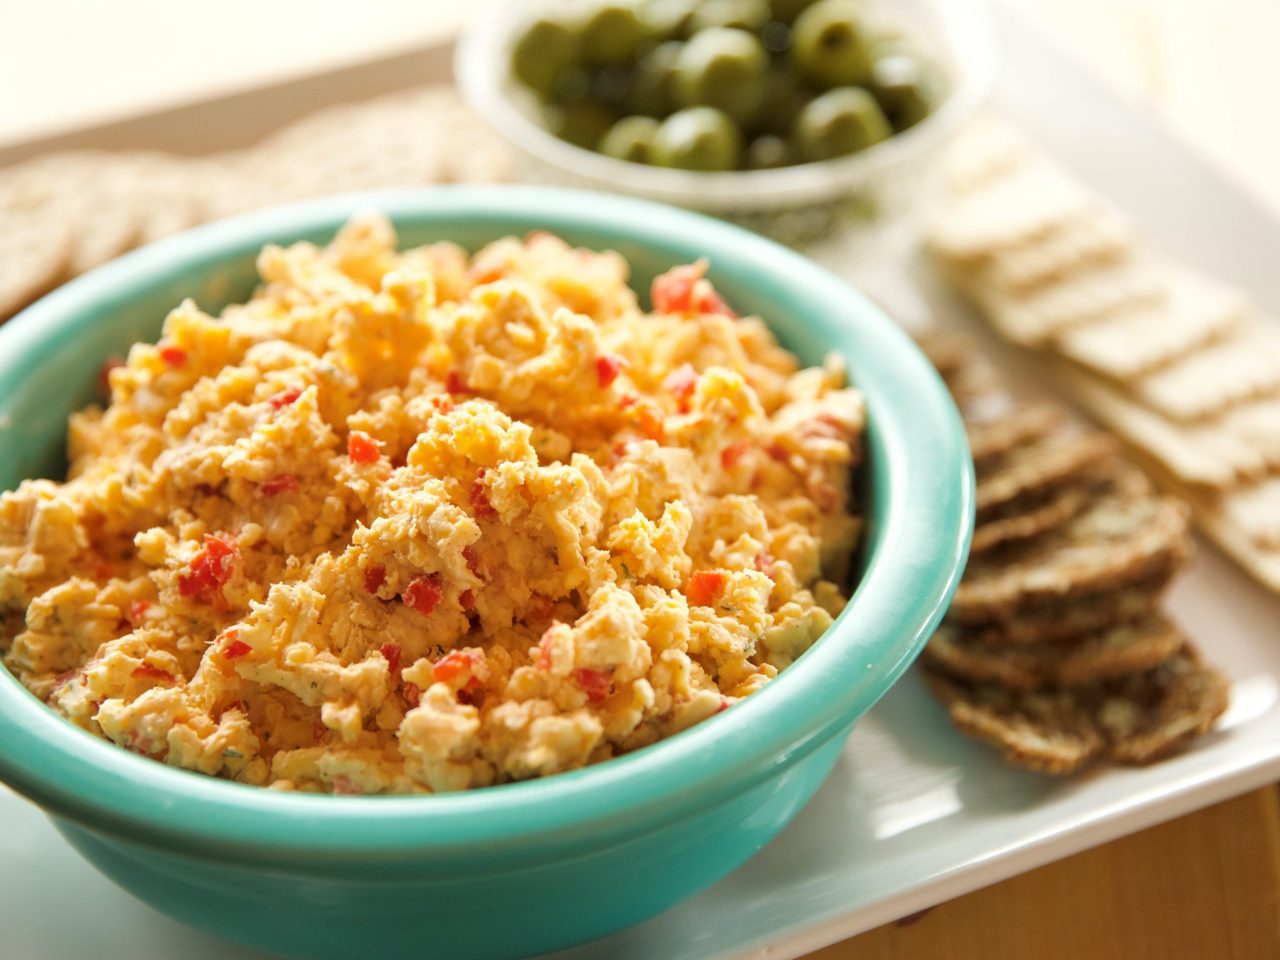 Ree Drummond's Pimento Cheese, as seen on The Pioneer Woman